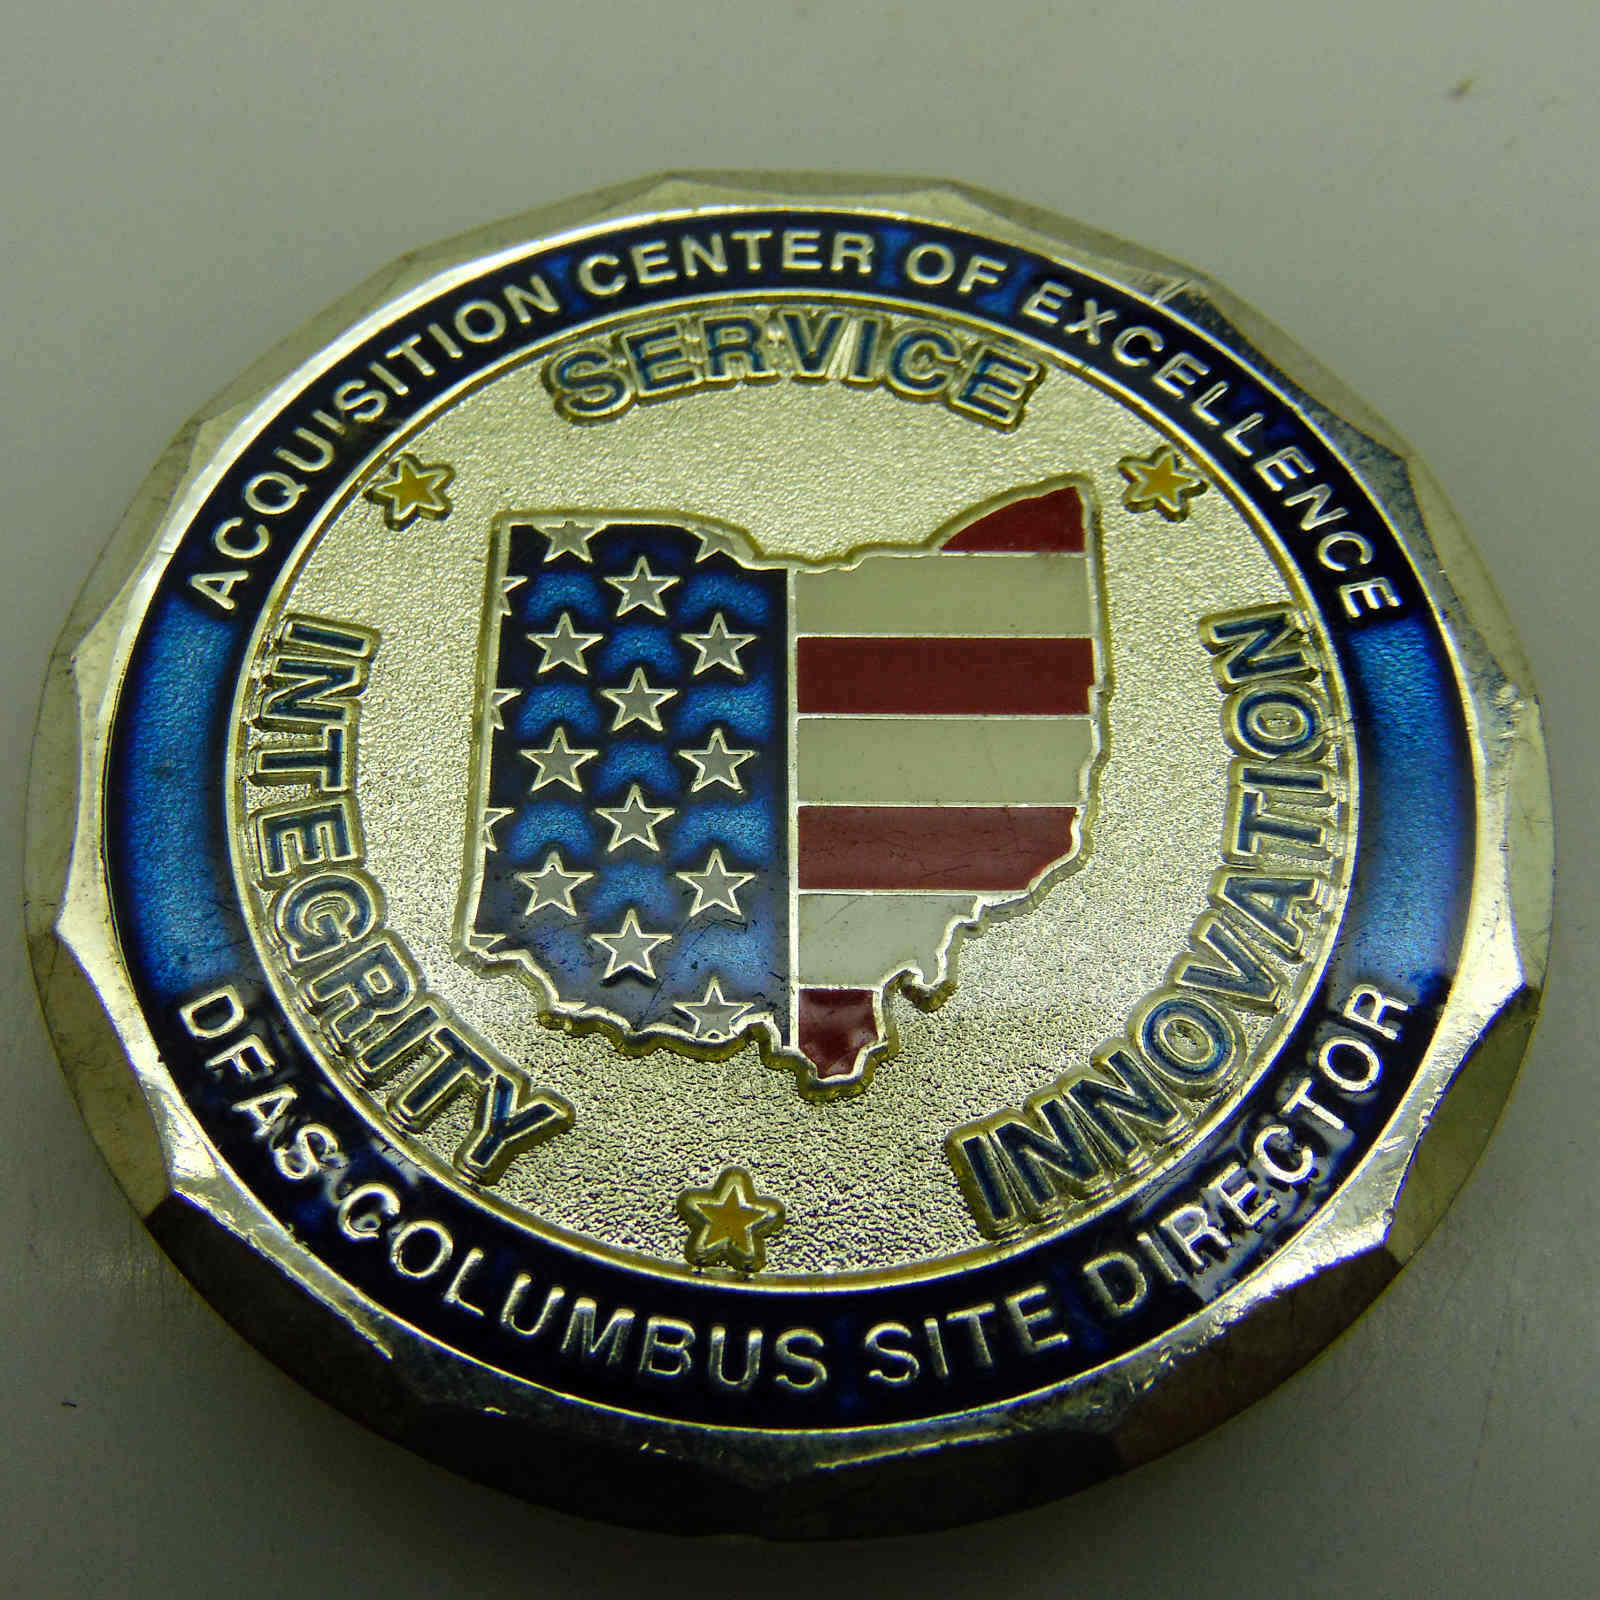 DEFENSE FINANCE AND ACCOUNTING SERVICE DFAS COLUMBUS SITE DIRECTO CHALLENGE COIN